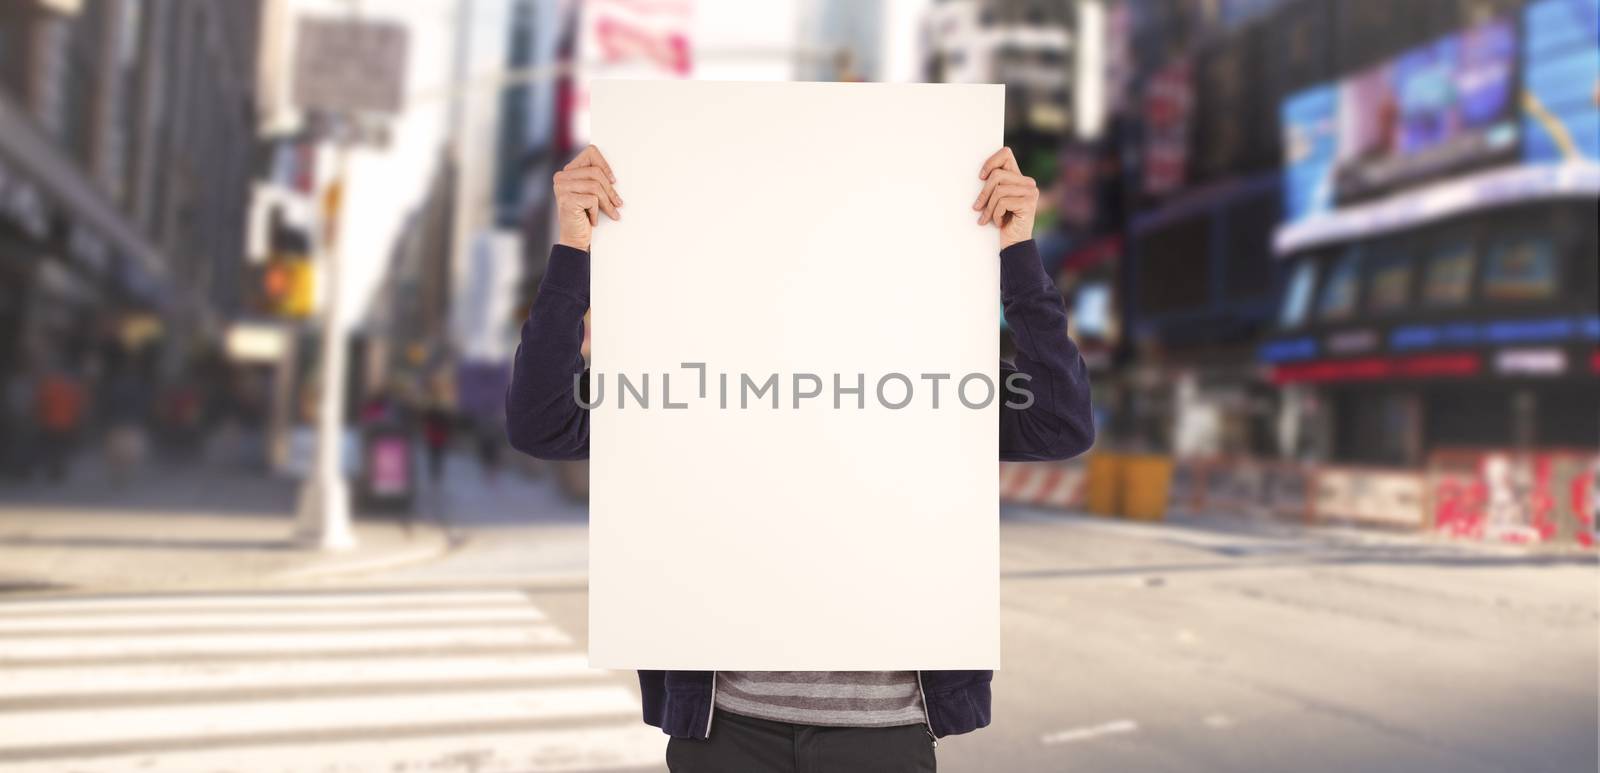 Man showing billboard in front of face against blurry new york street